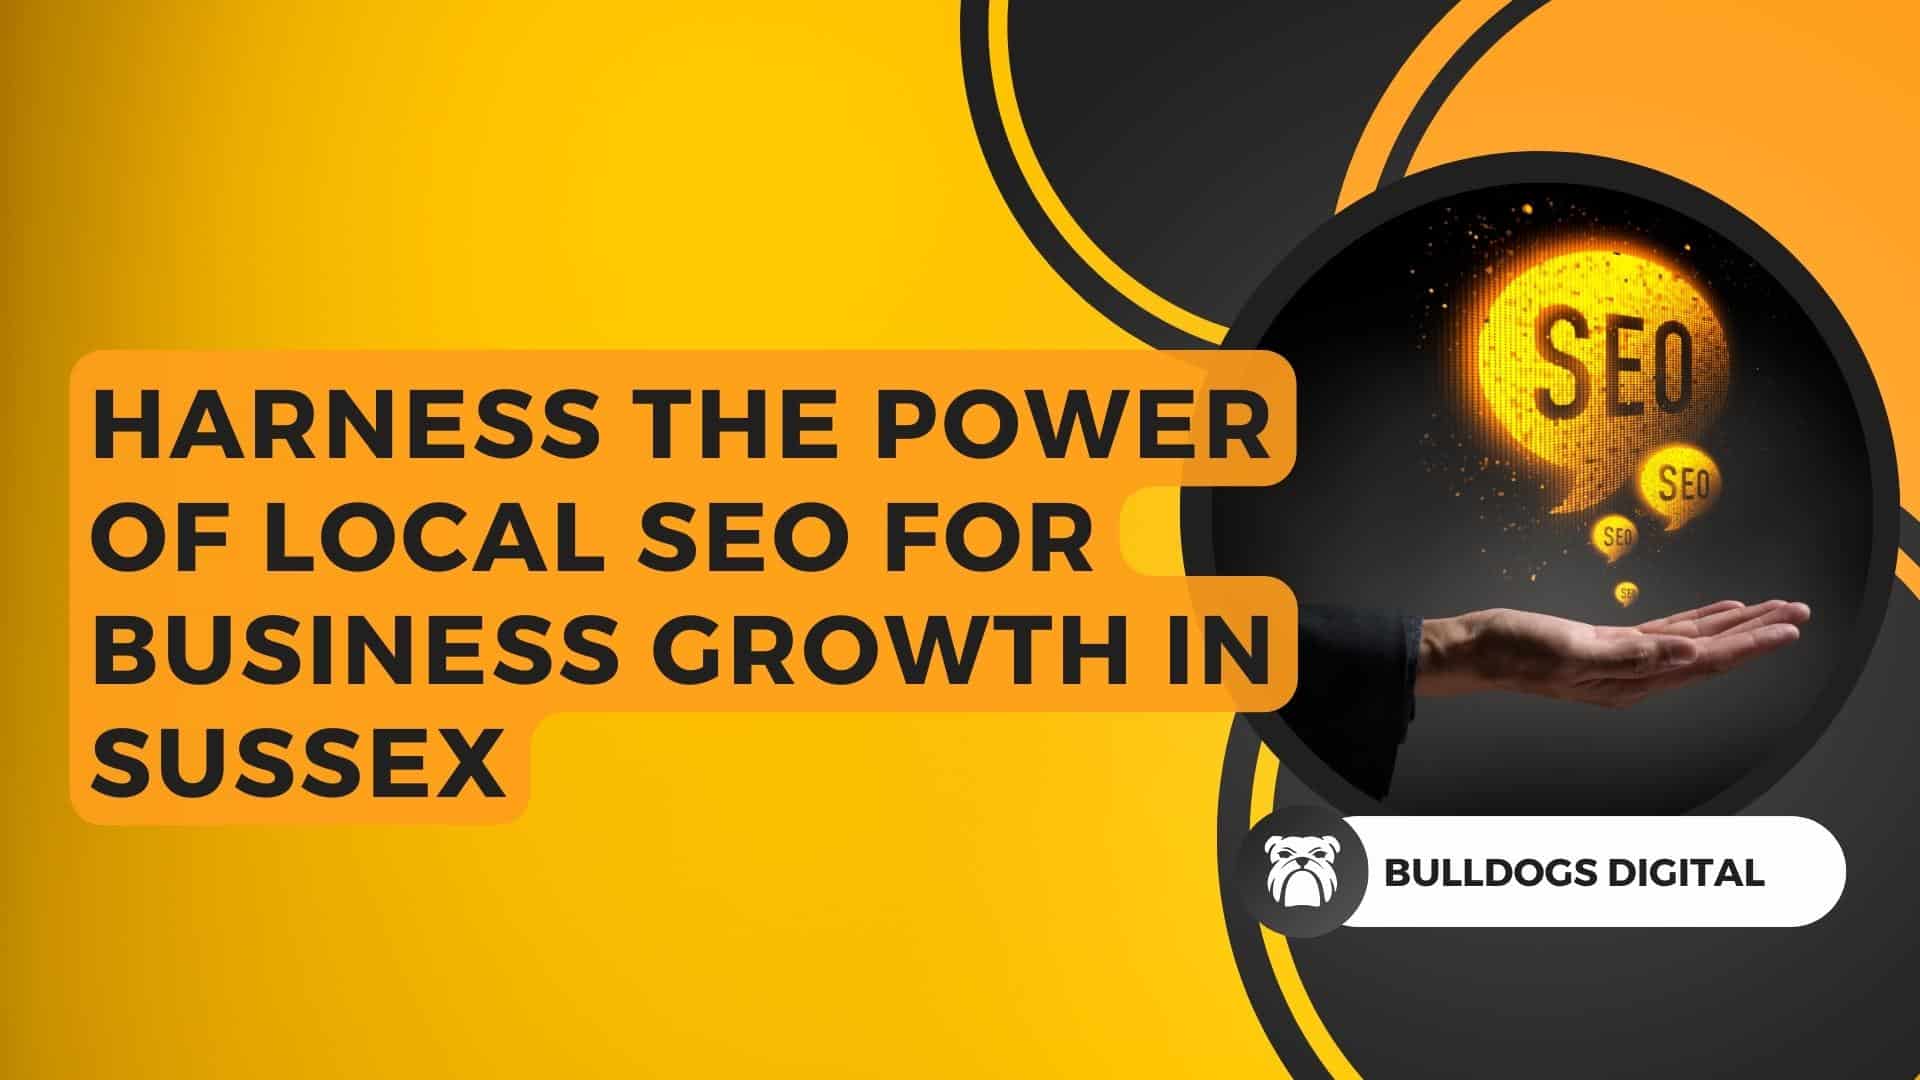 Harness the Power of Local SEO for Business Growth in Sussex Bulldogs Digital Website Design and Photography Sussex